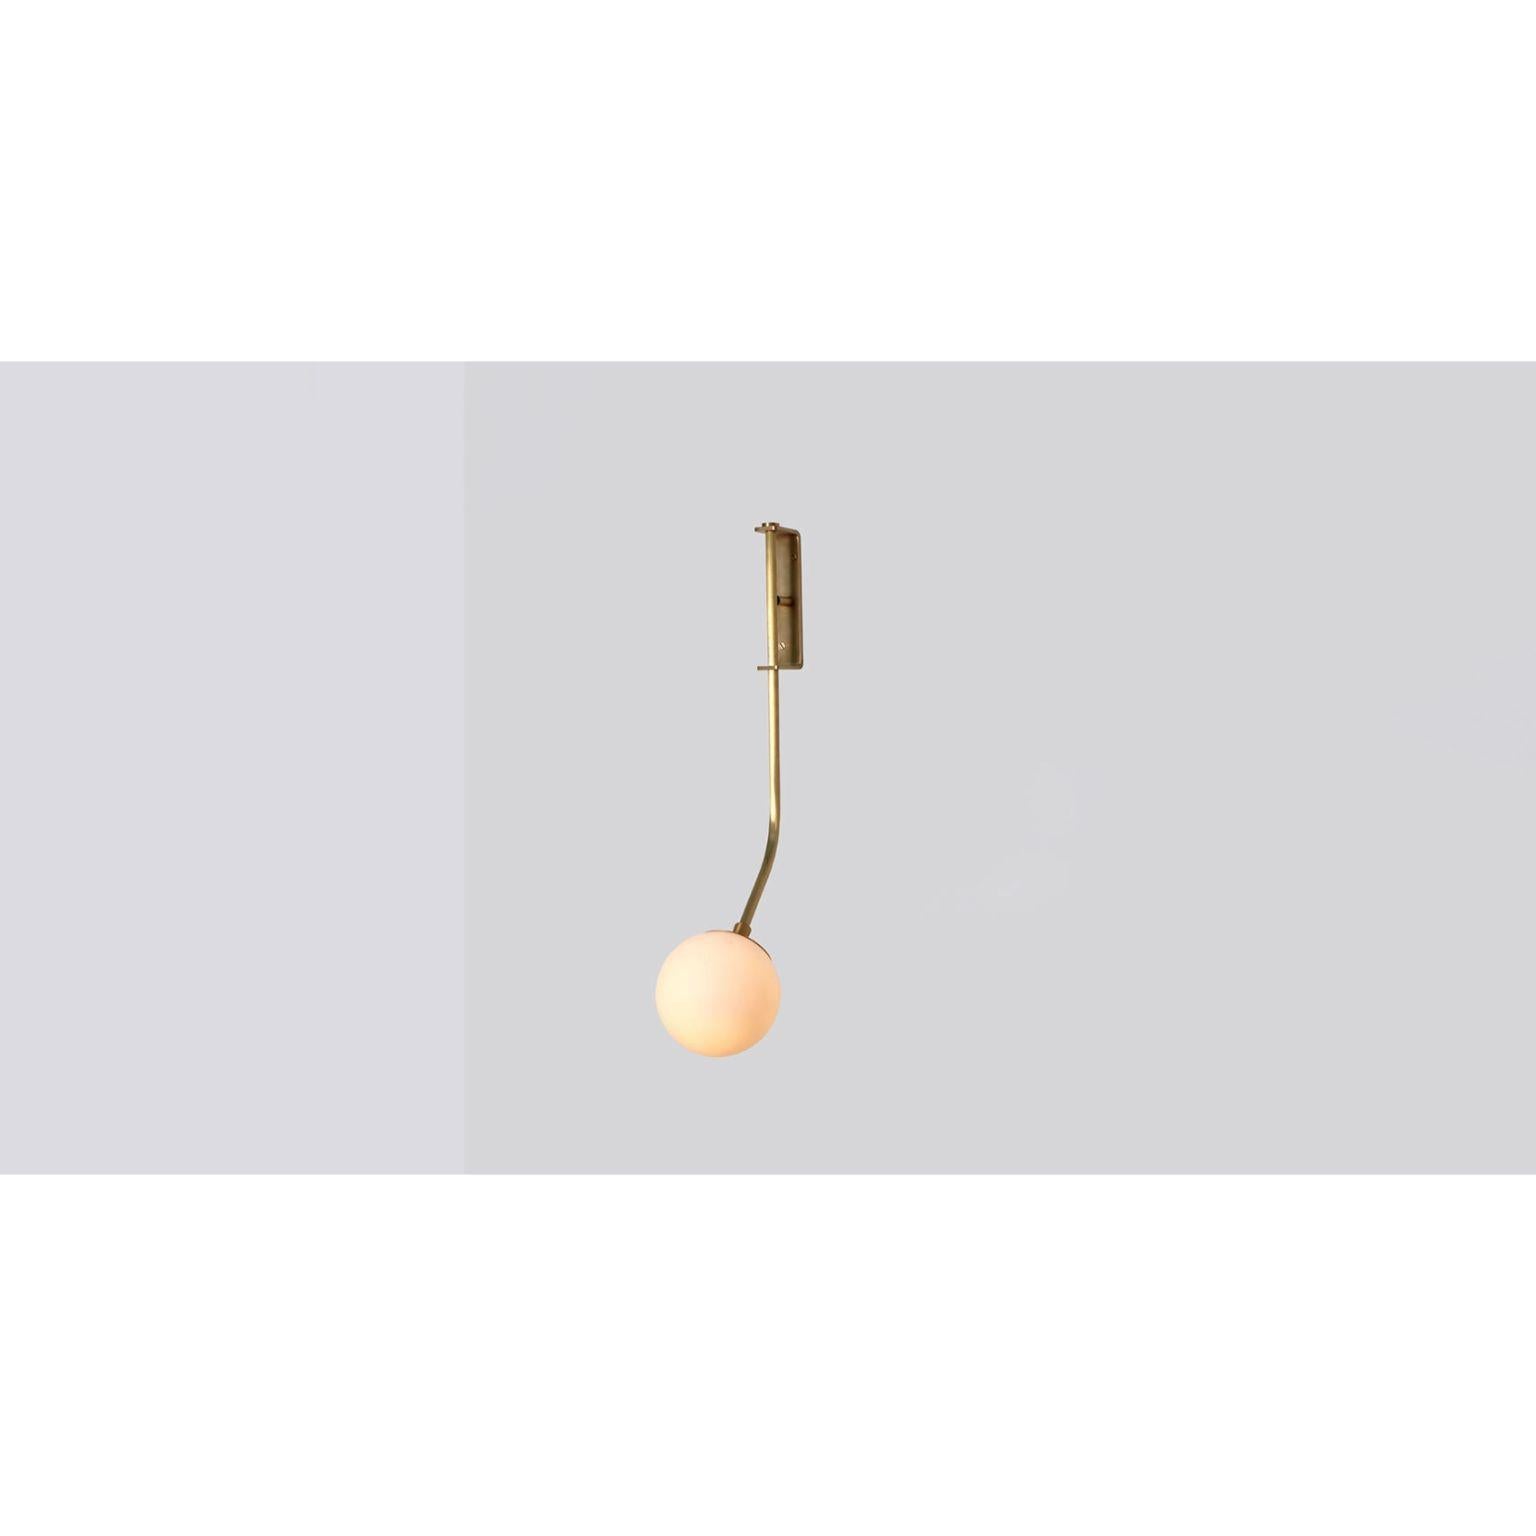 Rhythm Glass Globe Wall Sconce by Lamp Shaper
Dimensions: D 35.5 x W 29 x H 61 cm.
Materials: Brass and glass.

Different finishes available: raw brass, aged brass, burnt brass and brushed brass Please contact us.

All our lamps can be wired